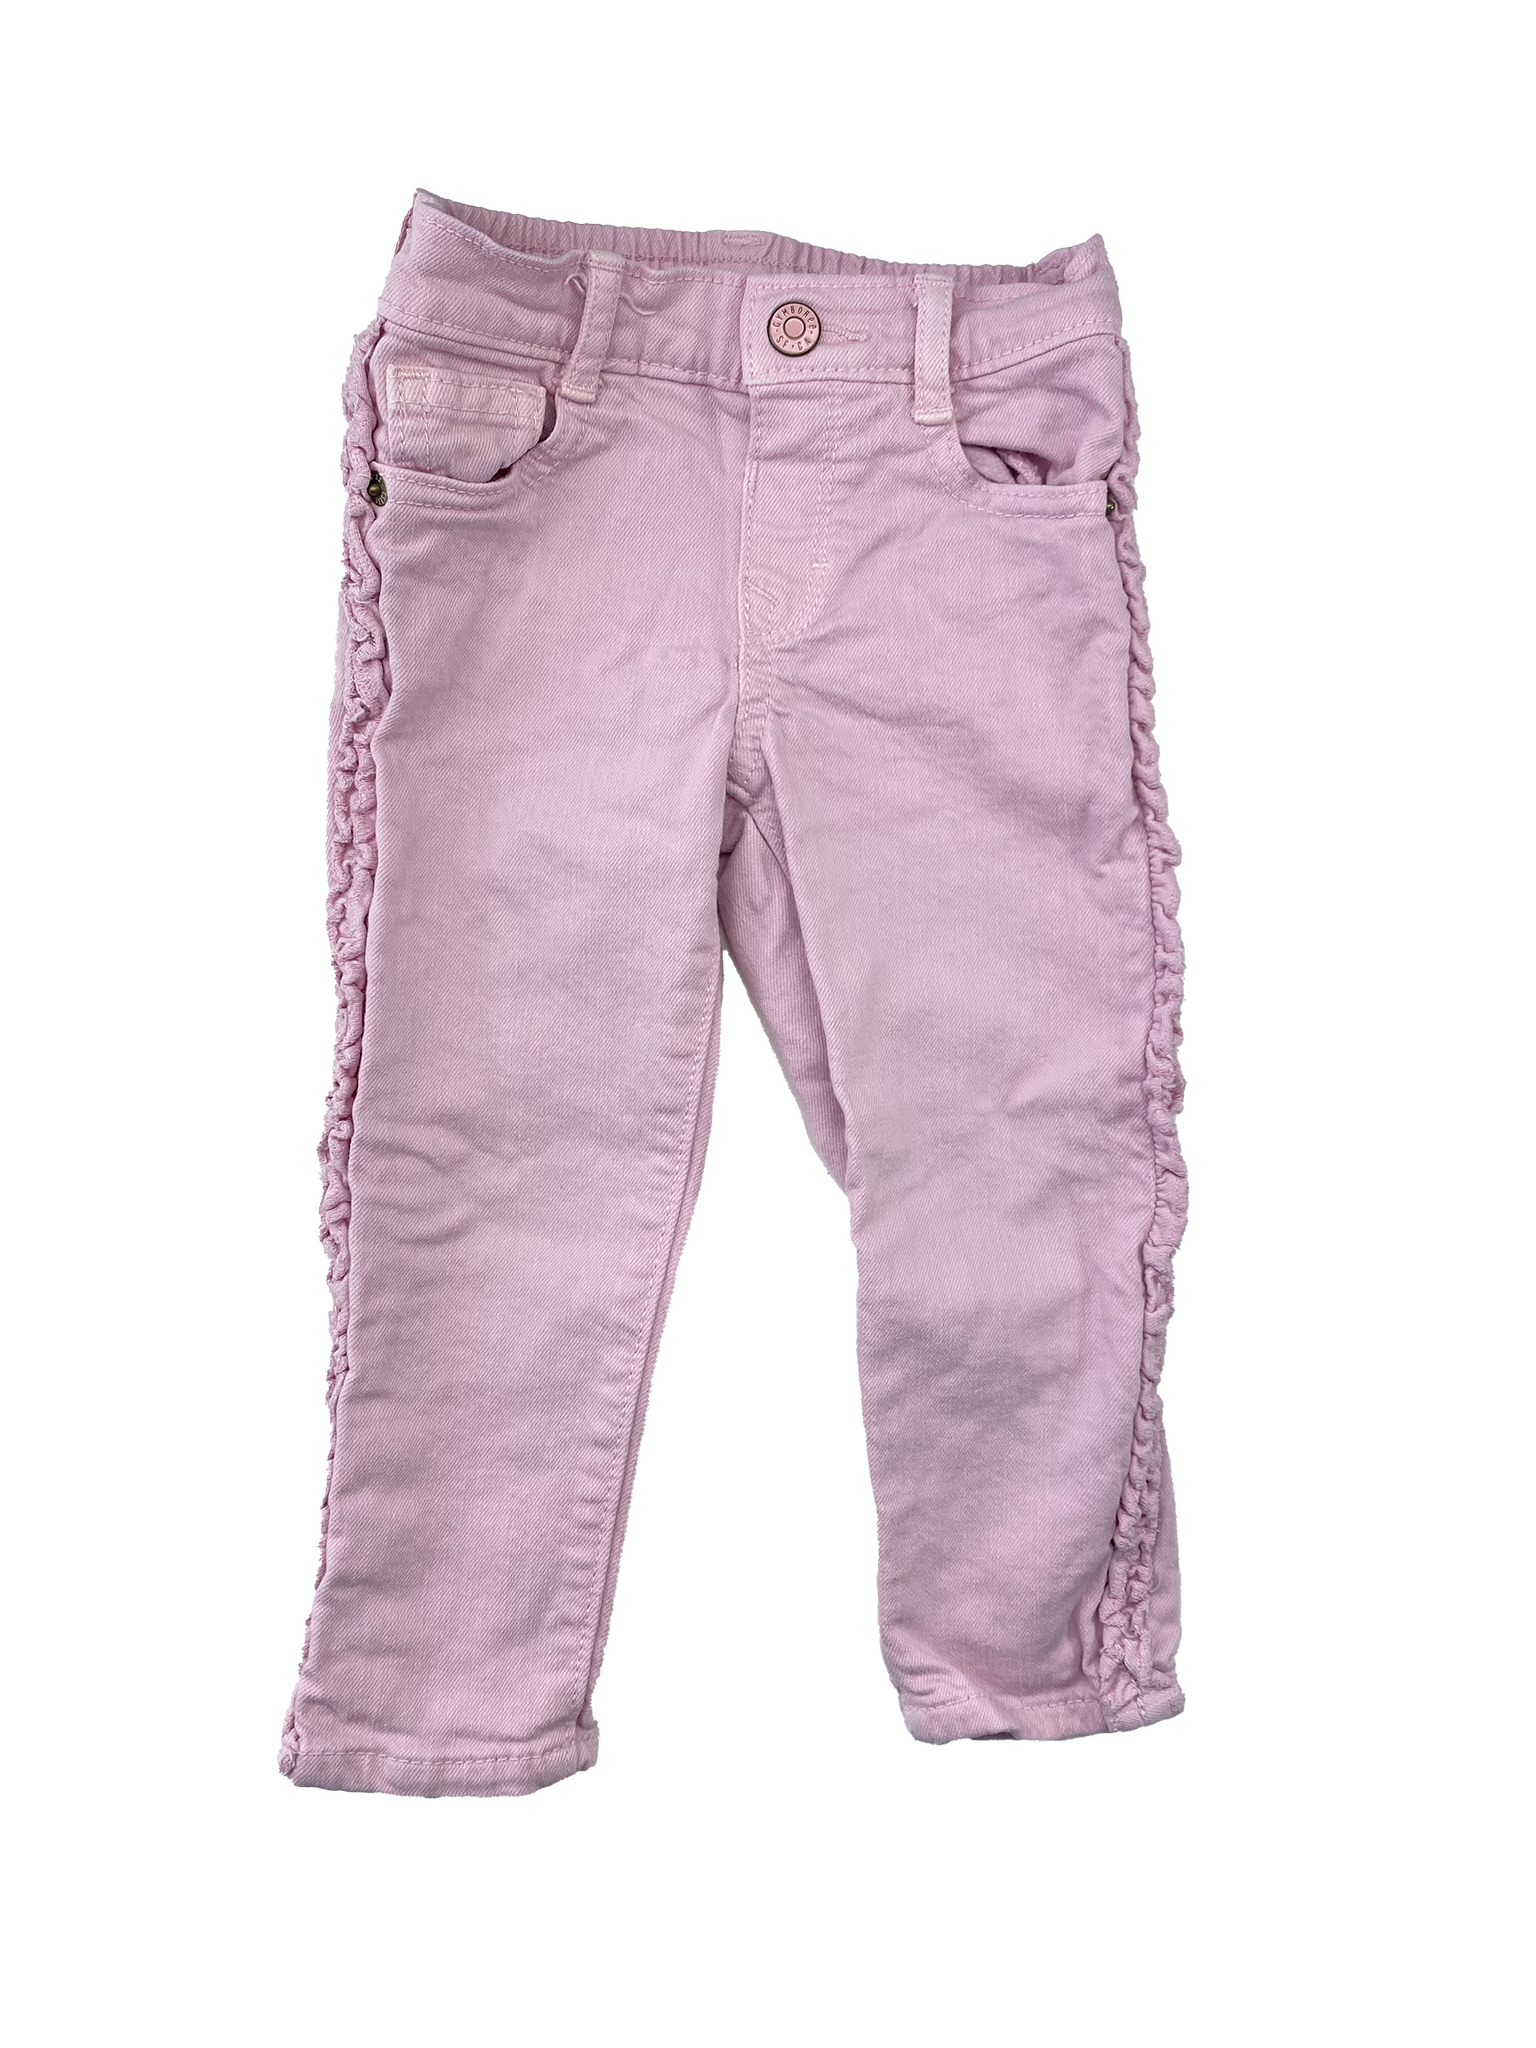 ❗️Stain: Gymboree Pink Jeans with Frills 2T